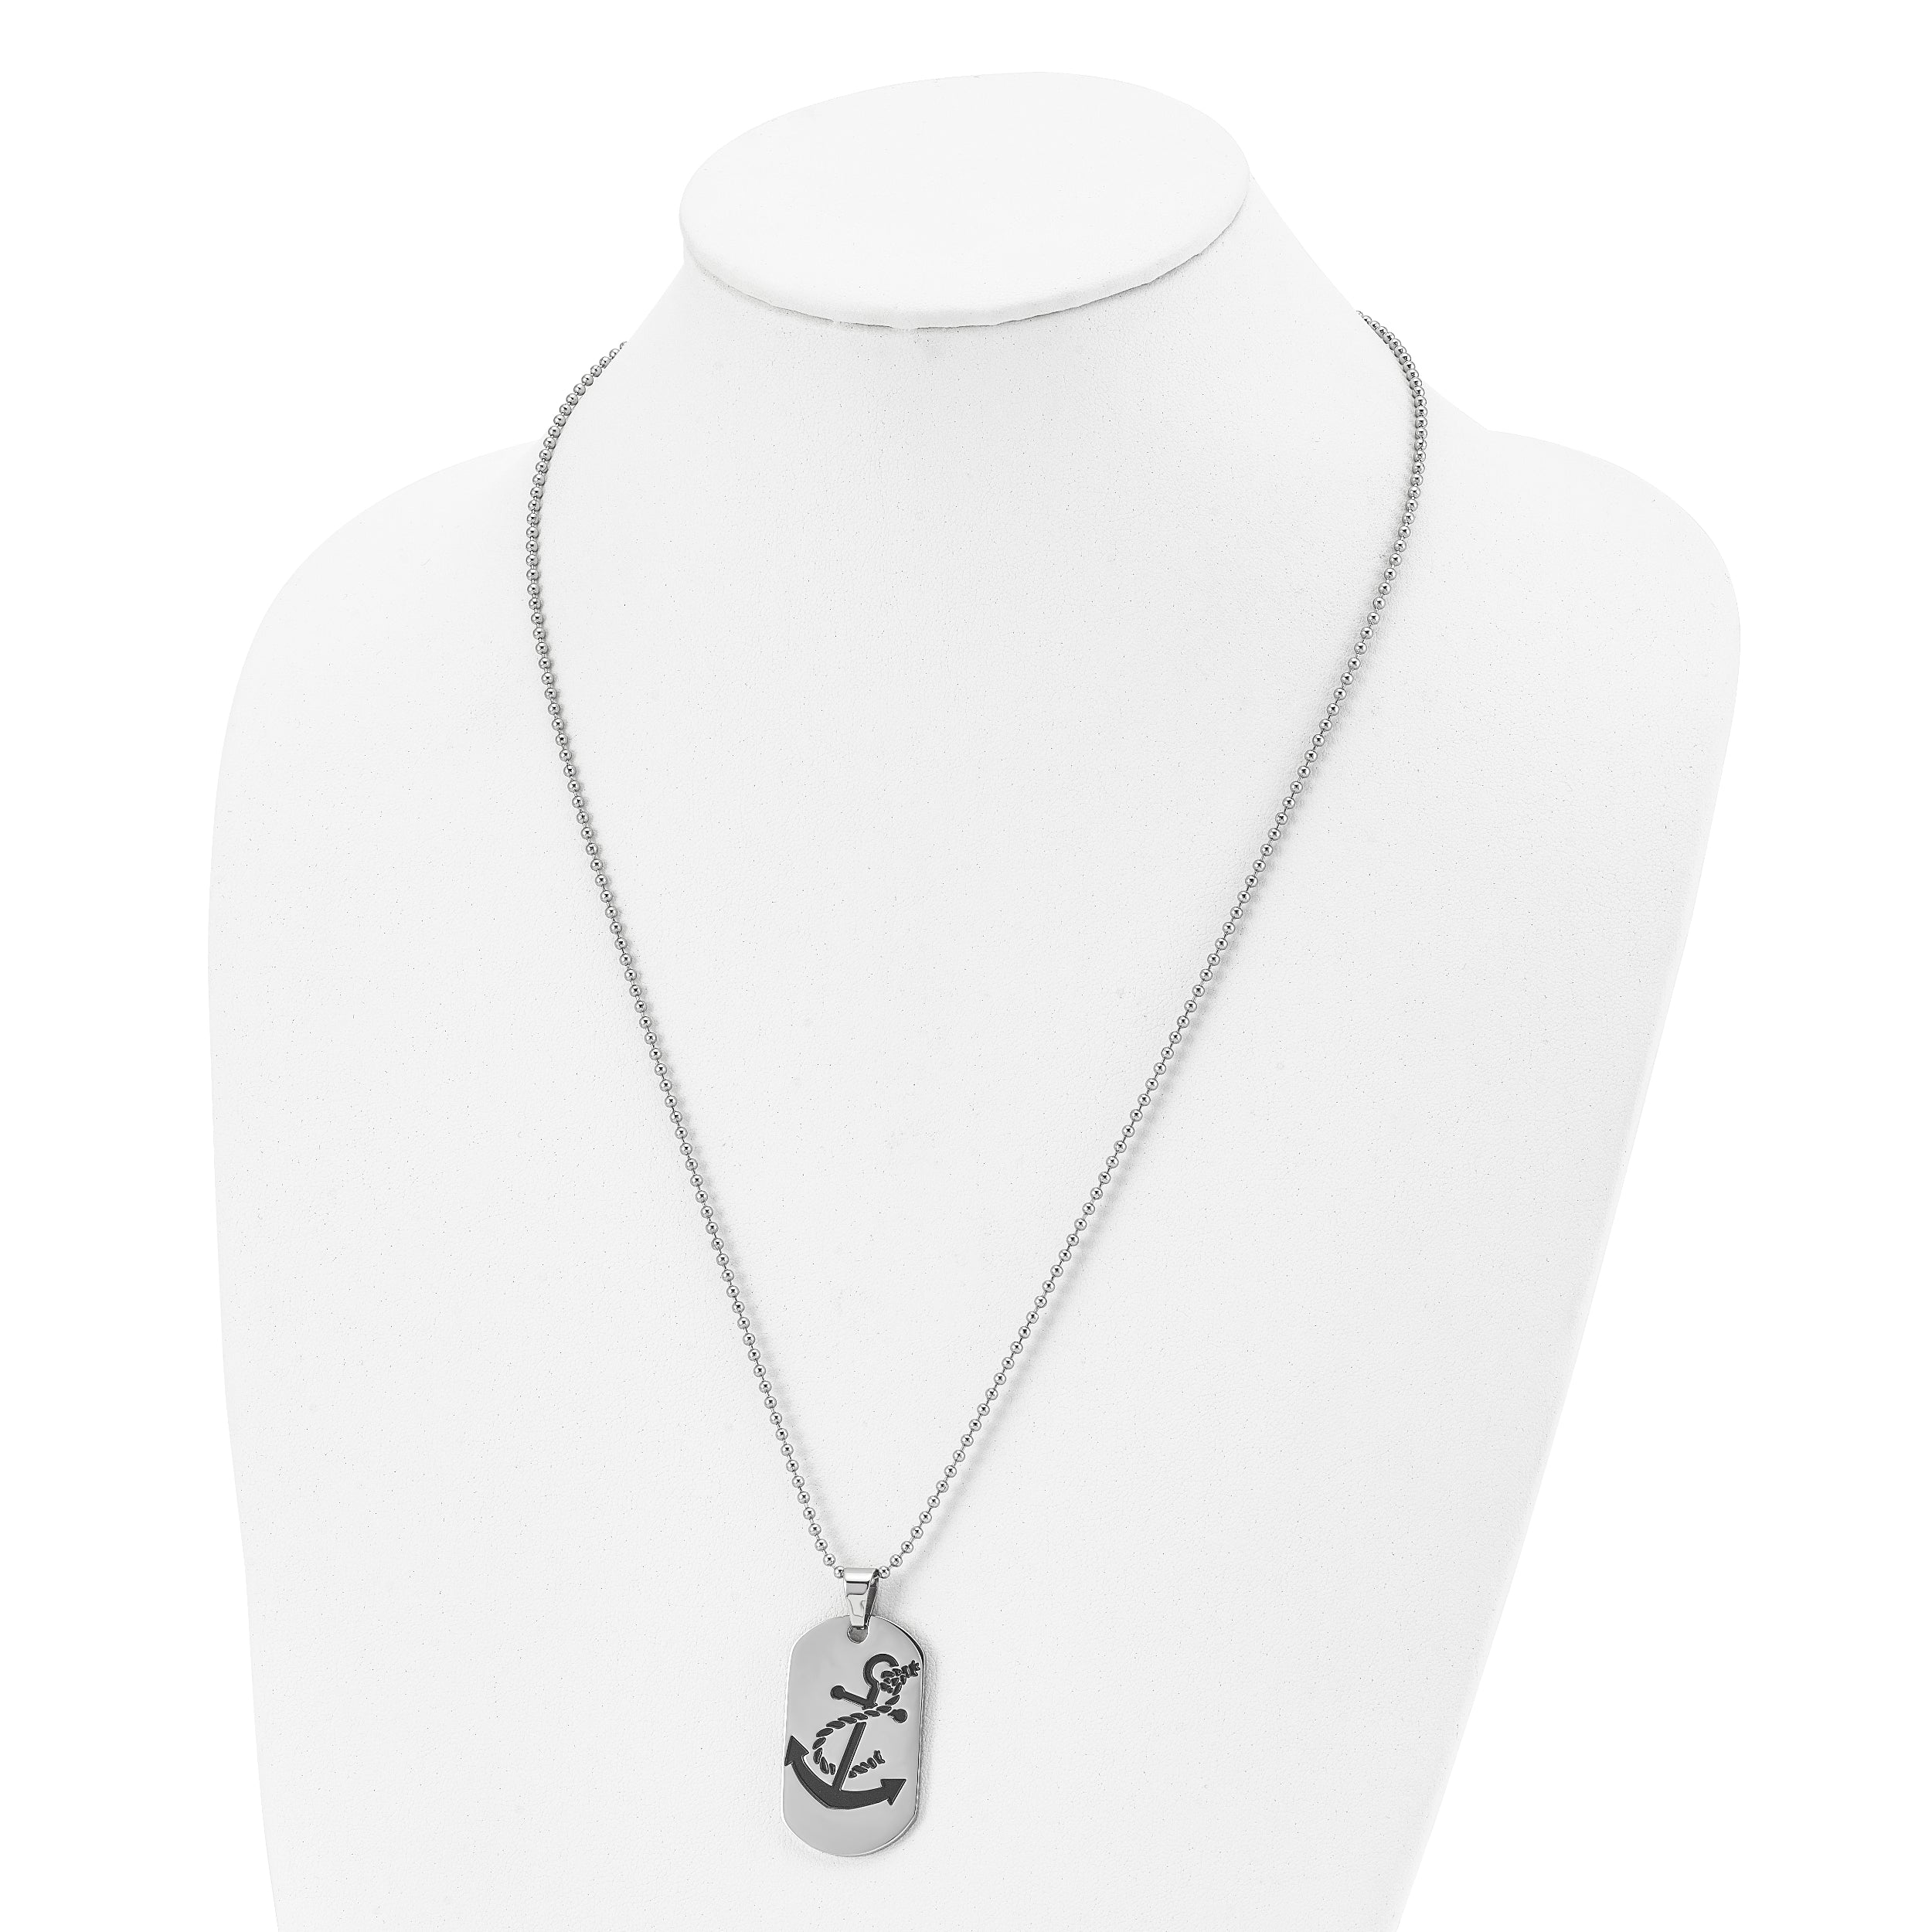 Chisel Stainless Steel Polished Enameled Anchor Dog Tag on a 24 inch Ball Chain Necklace